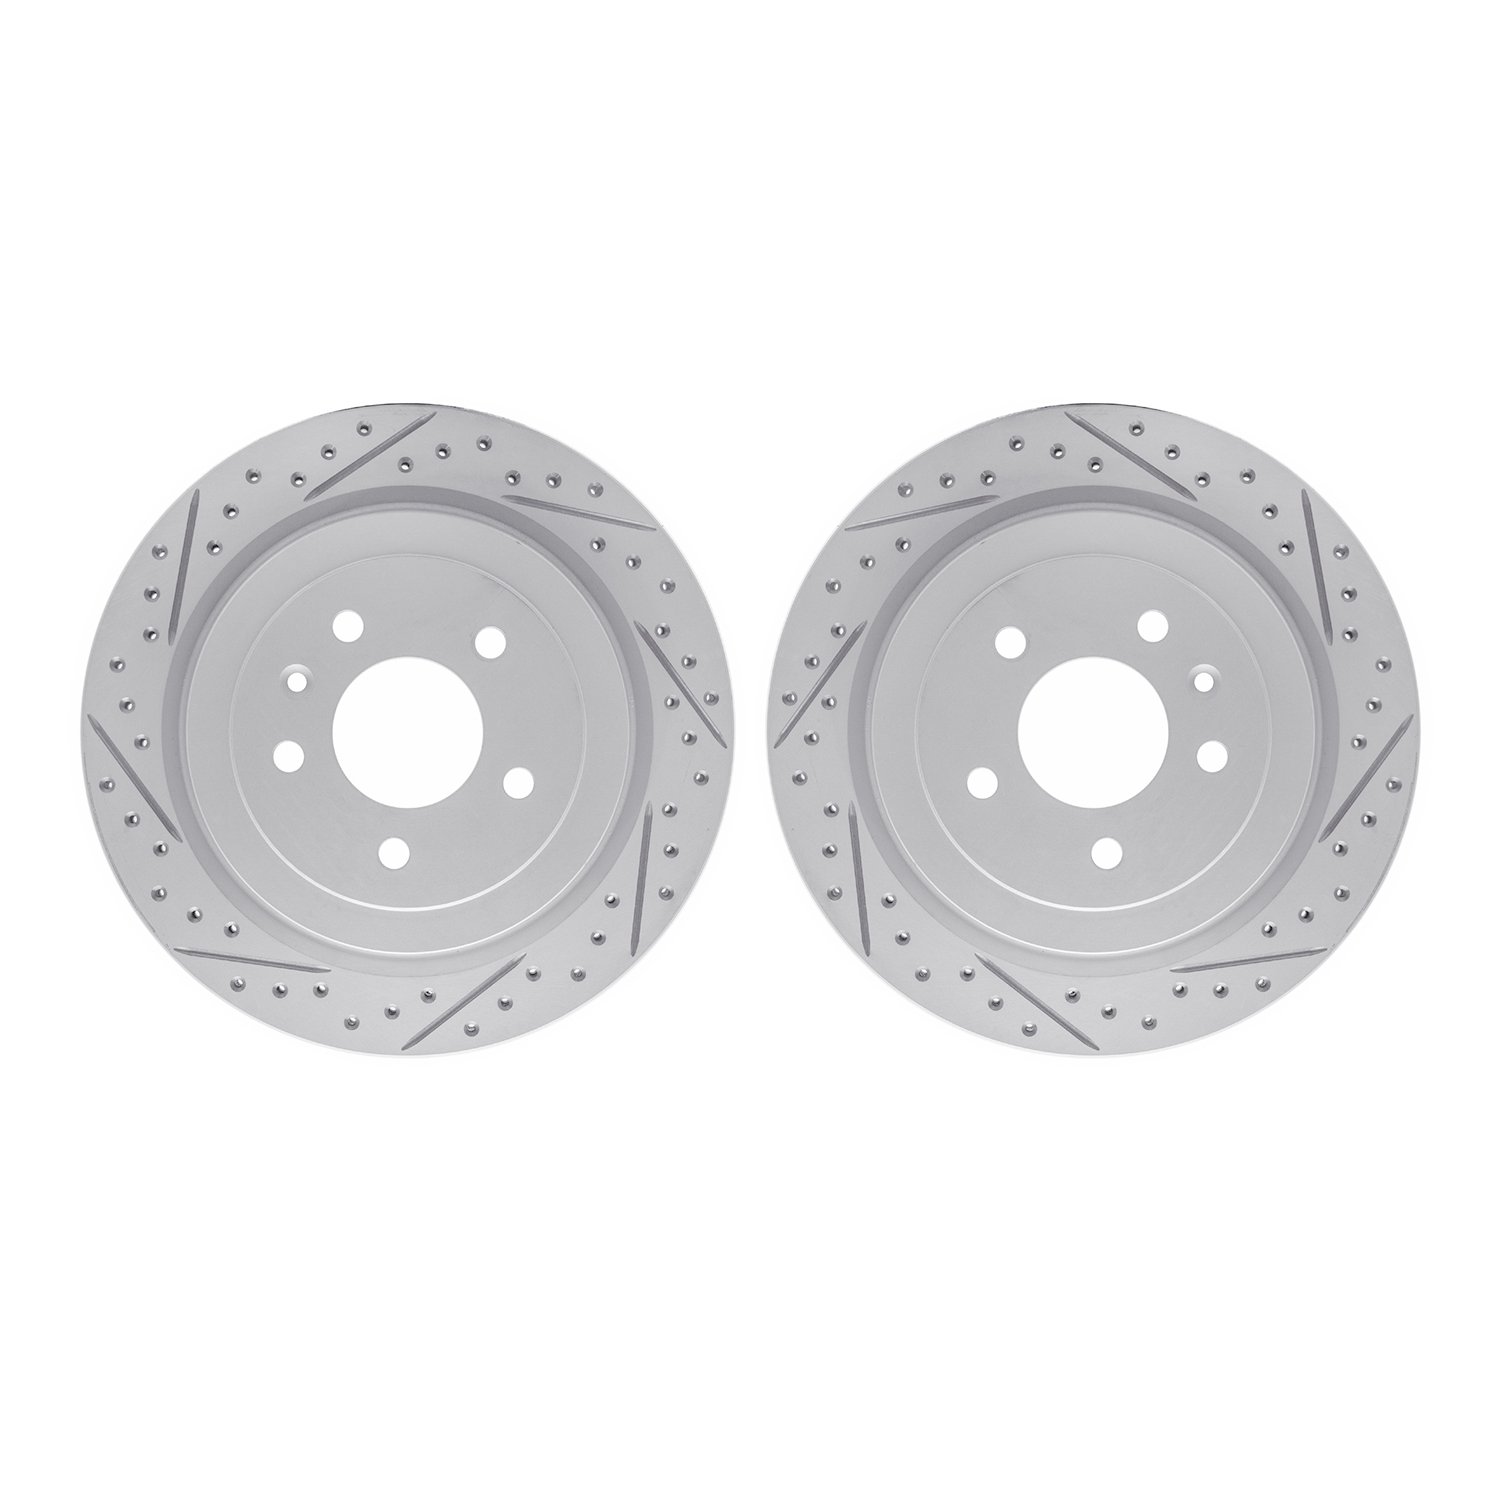 2002-46026 Geoperformance Drilled/Slotted Brake Rotors, 2013-2019 GM, Position: Rear